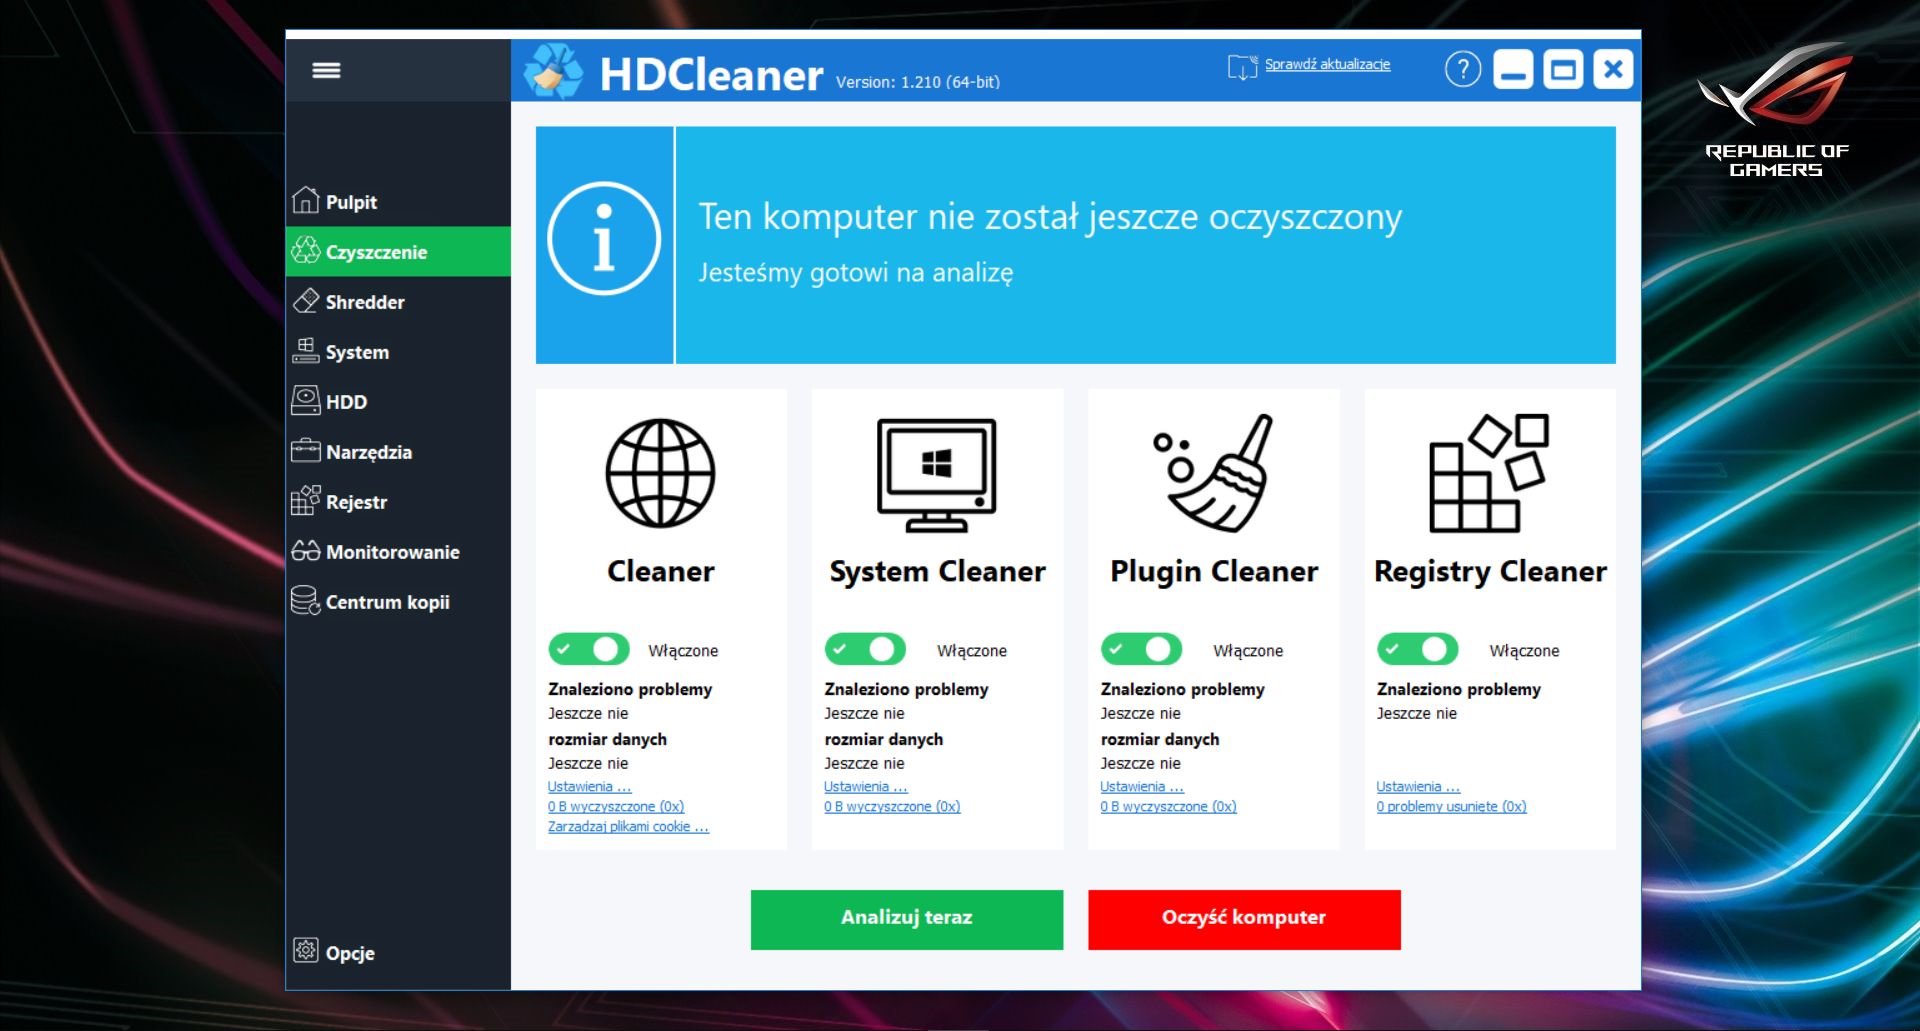 instal HDCleaner 2.051 free